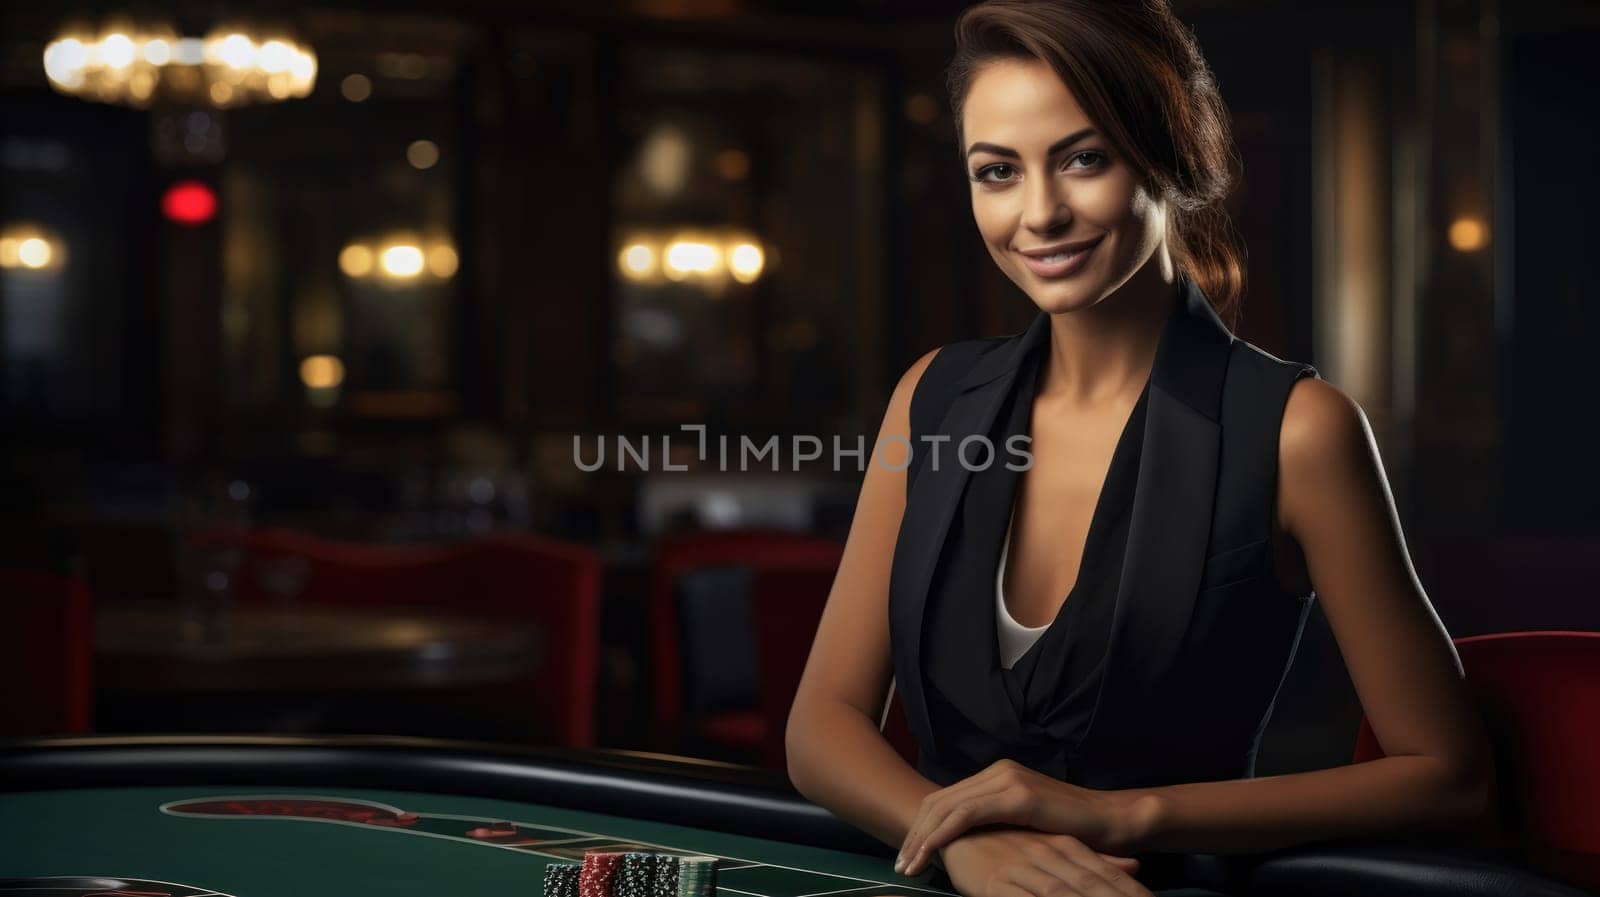 Smiling woman dealer at an empty poker table by natali_brill